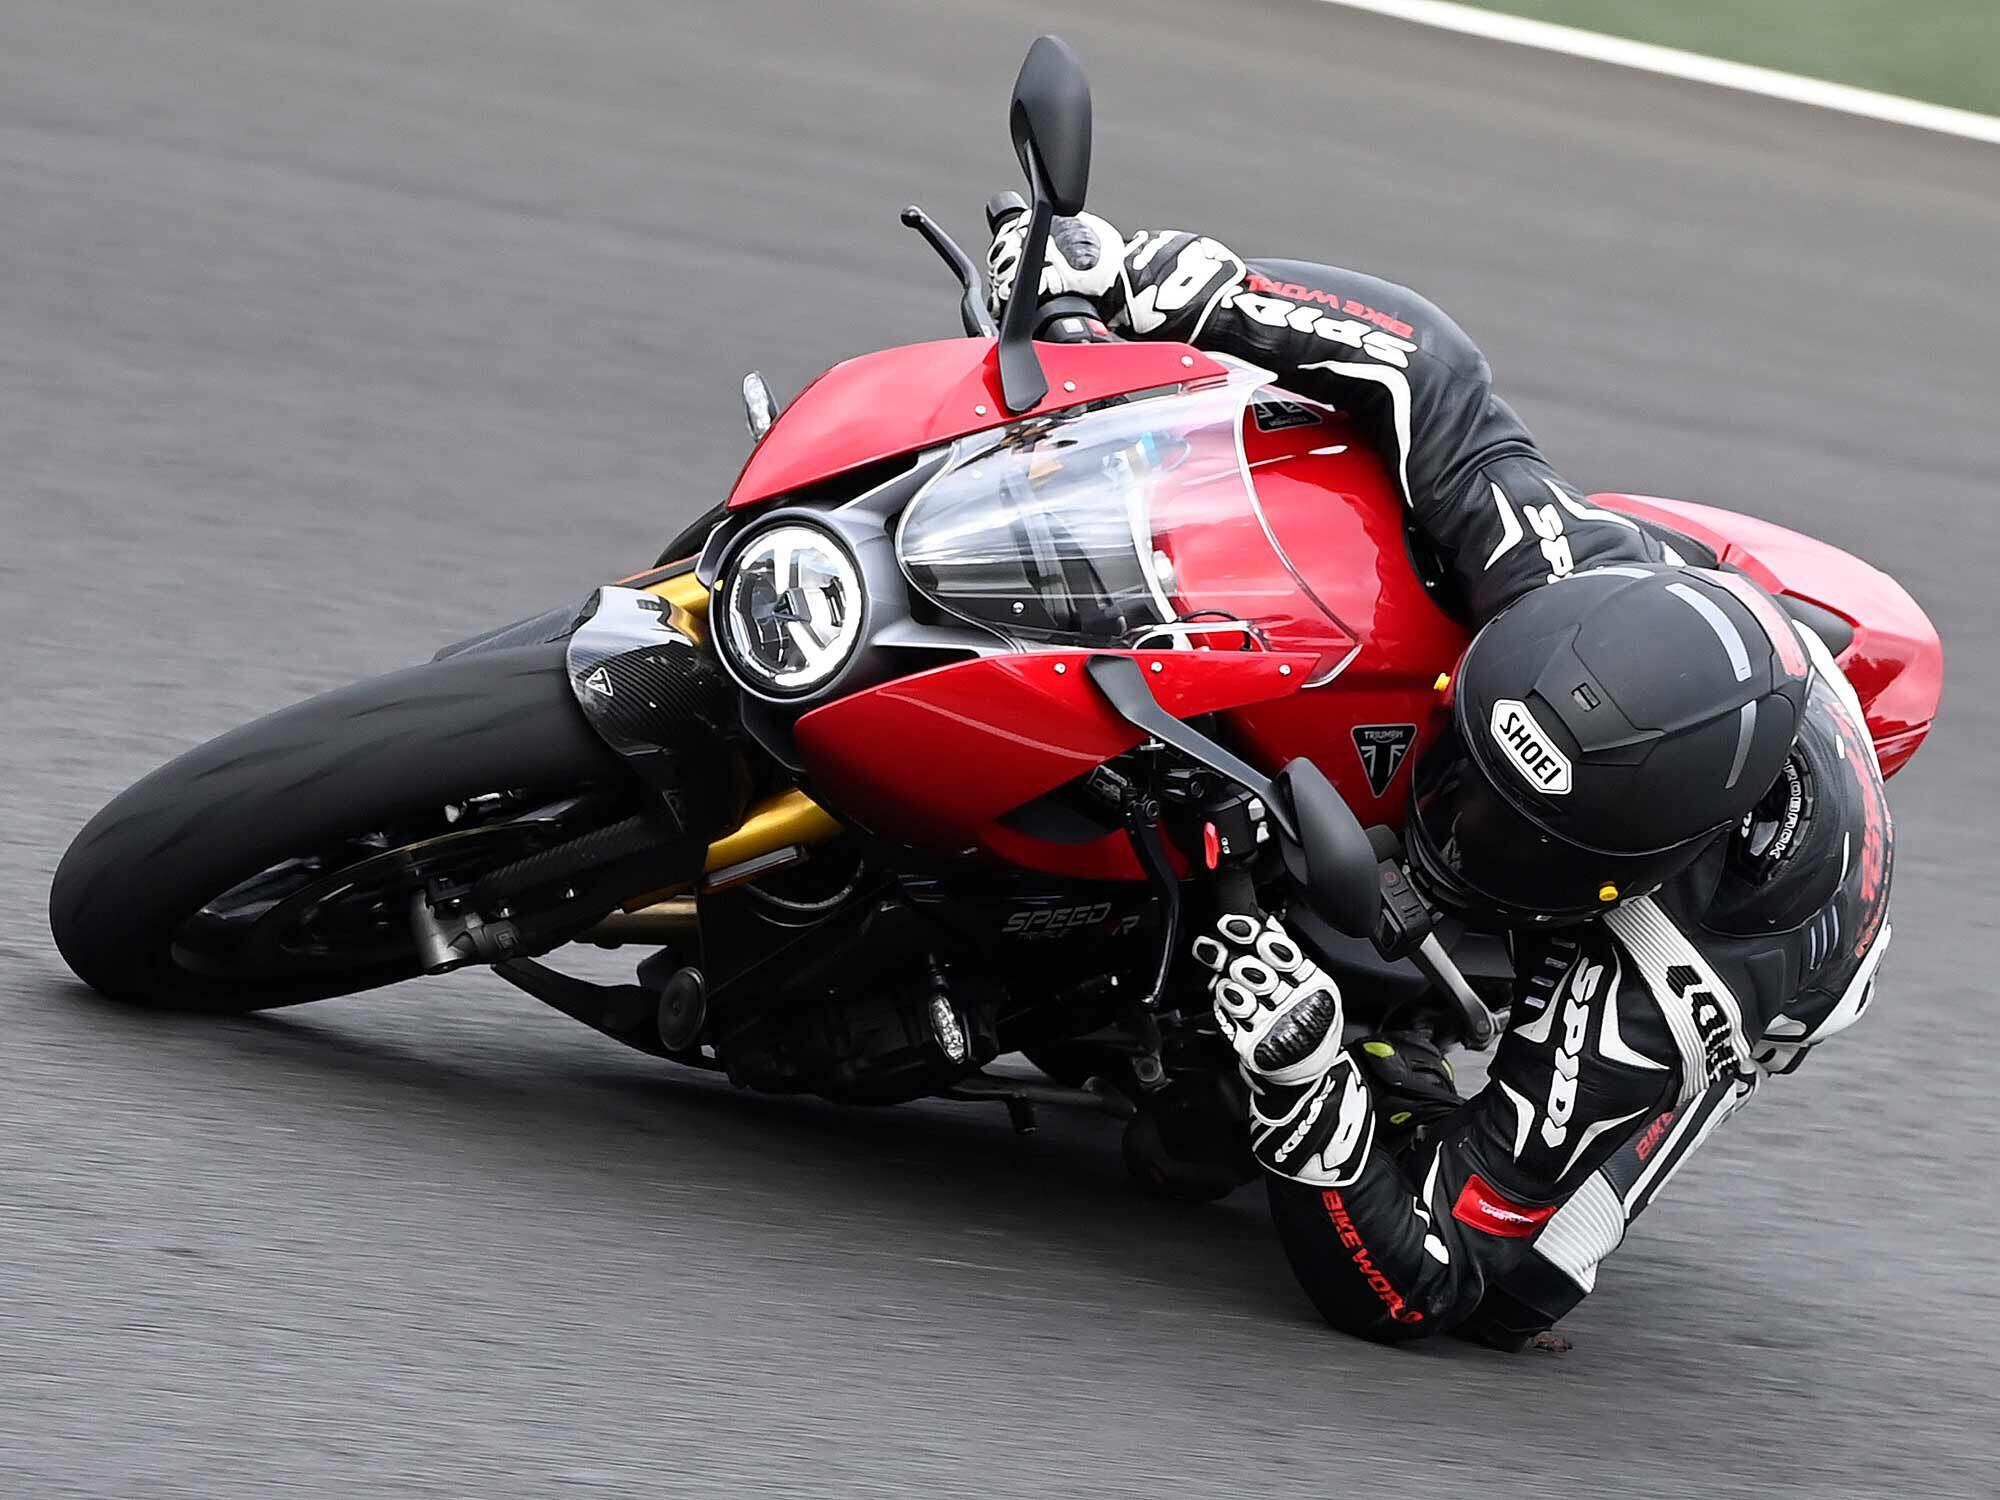 On the track and street, the Triumph Speed Triple 1200 RR brings sportbike performance with comfort and style.